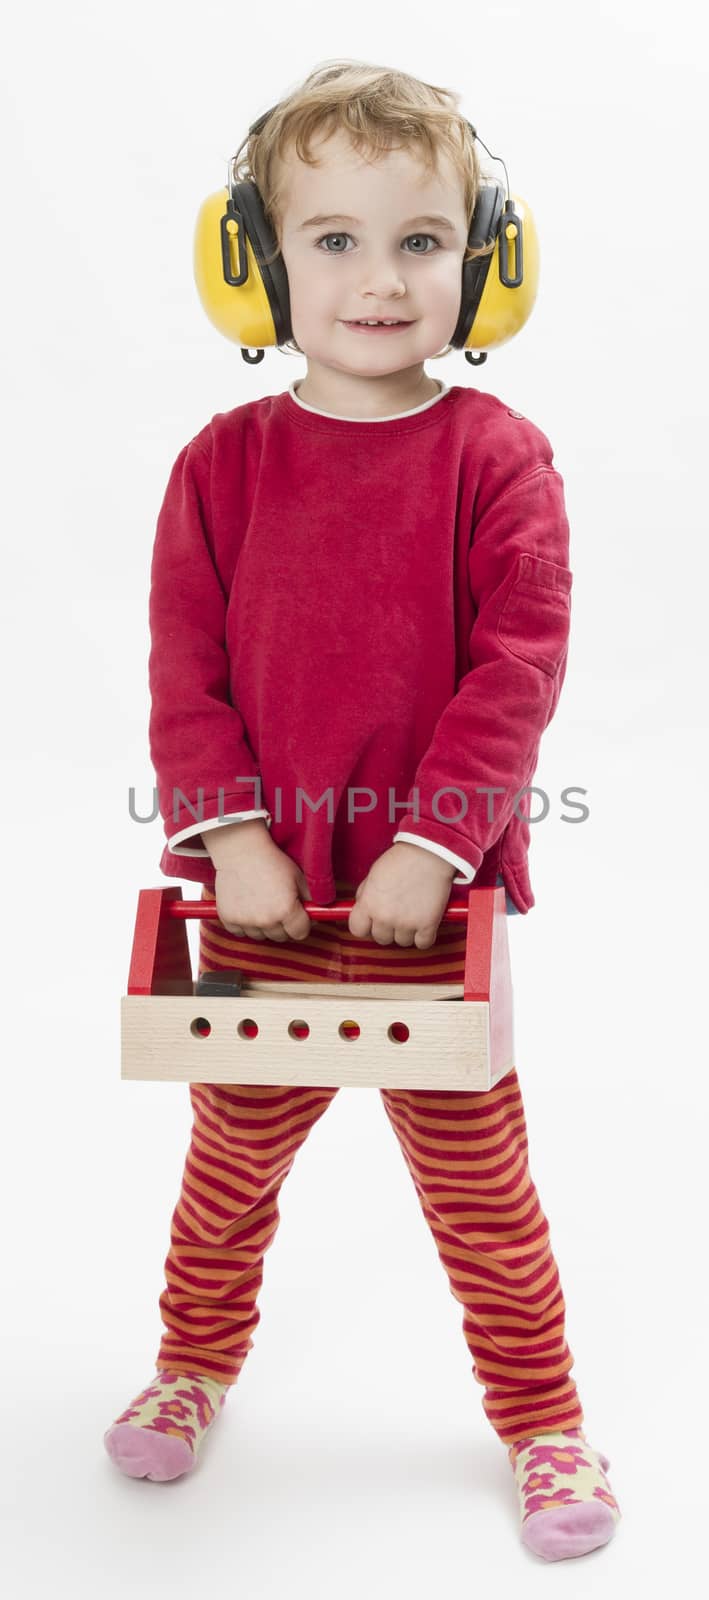 child in red with toolbox and earmuffs by gewoldi